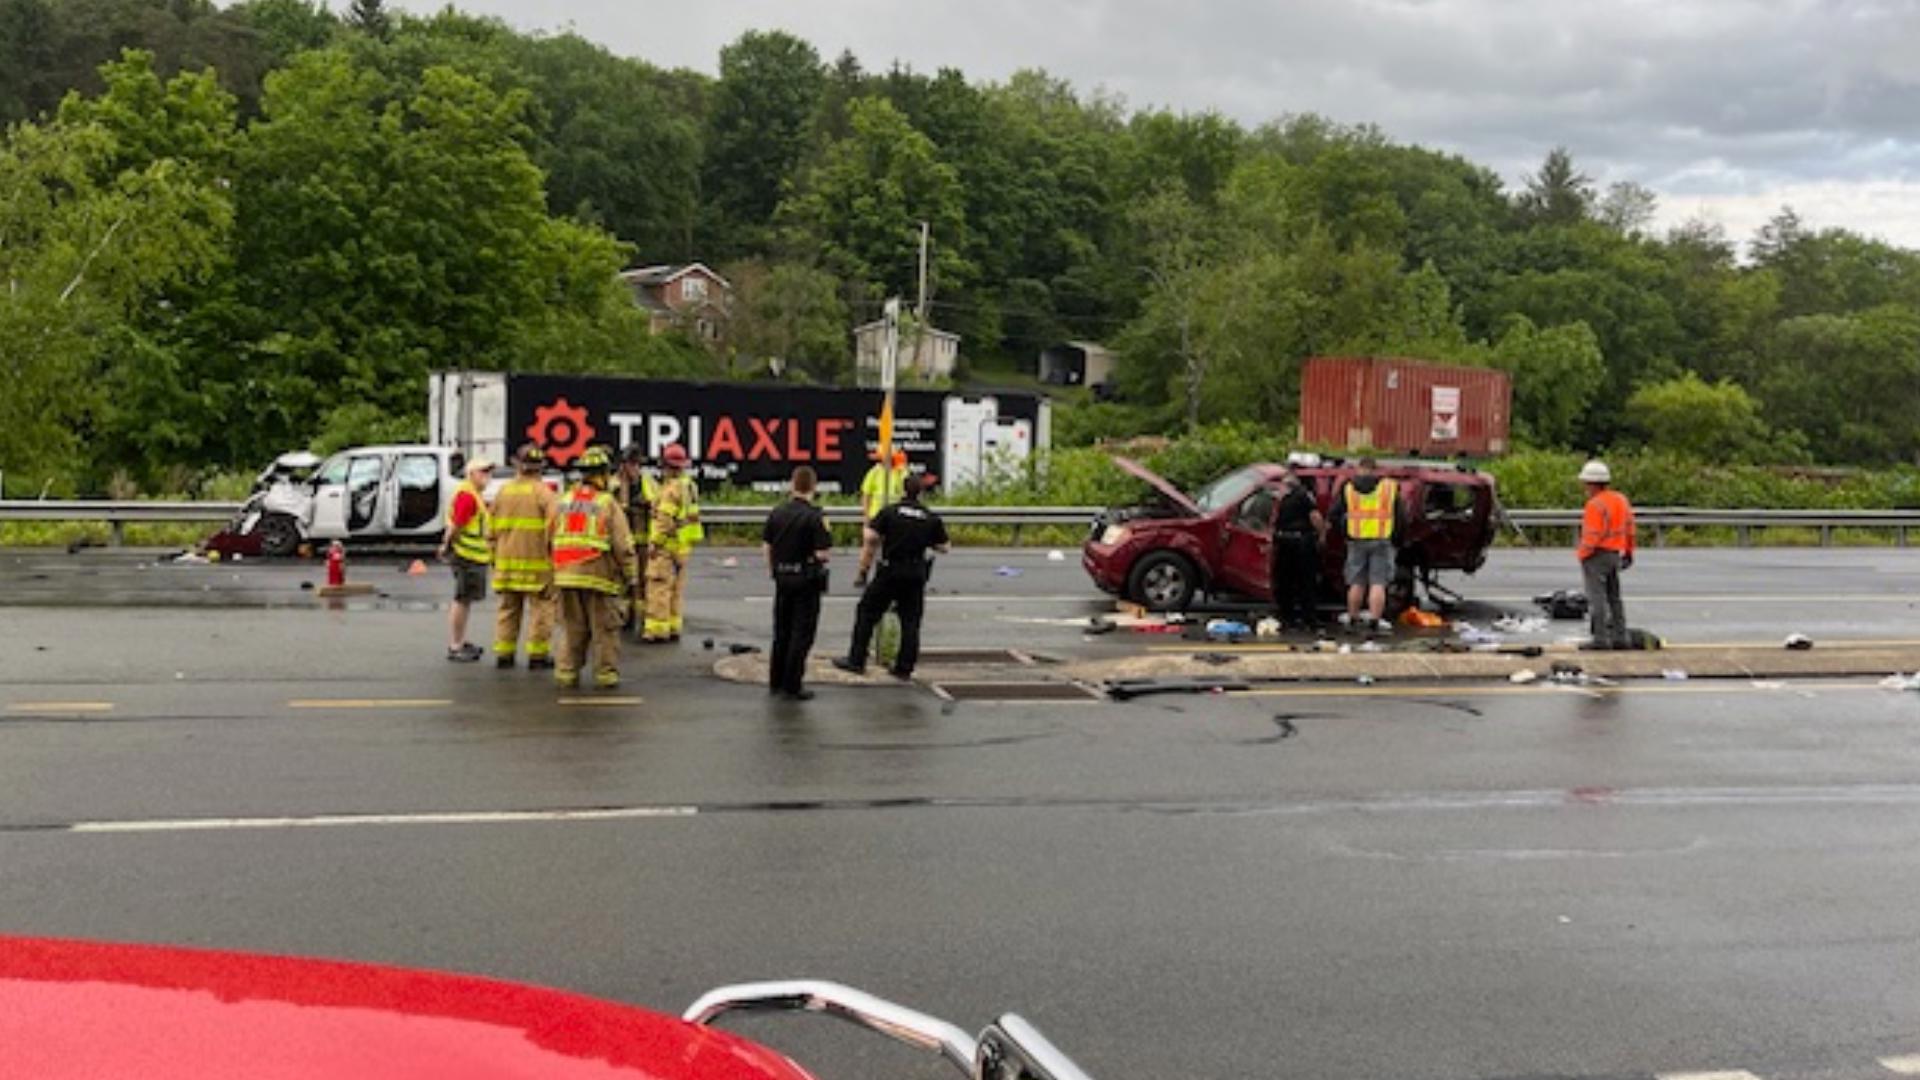 Several people are injured and lanes are closed in both directions after a multi-vehicle crash on Route 6 in Dalton on Friday afternoon.